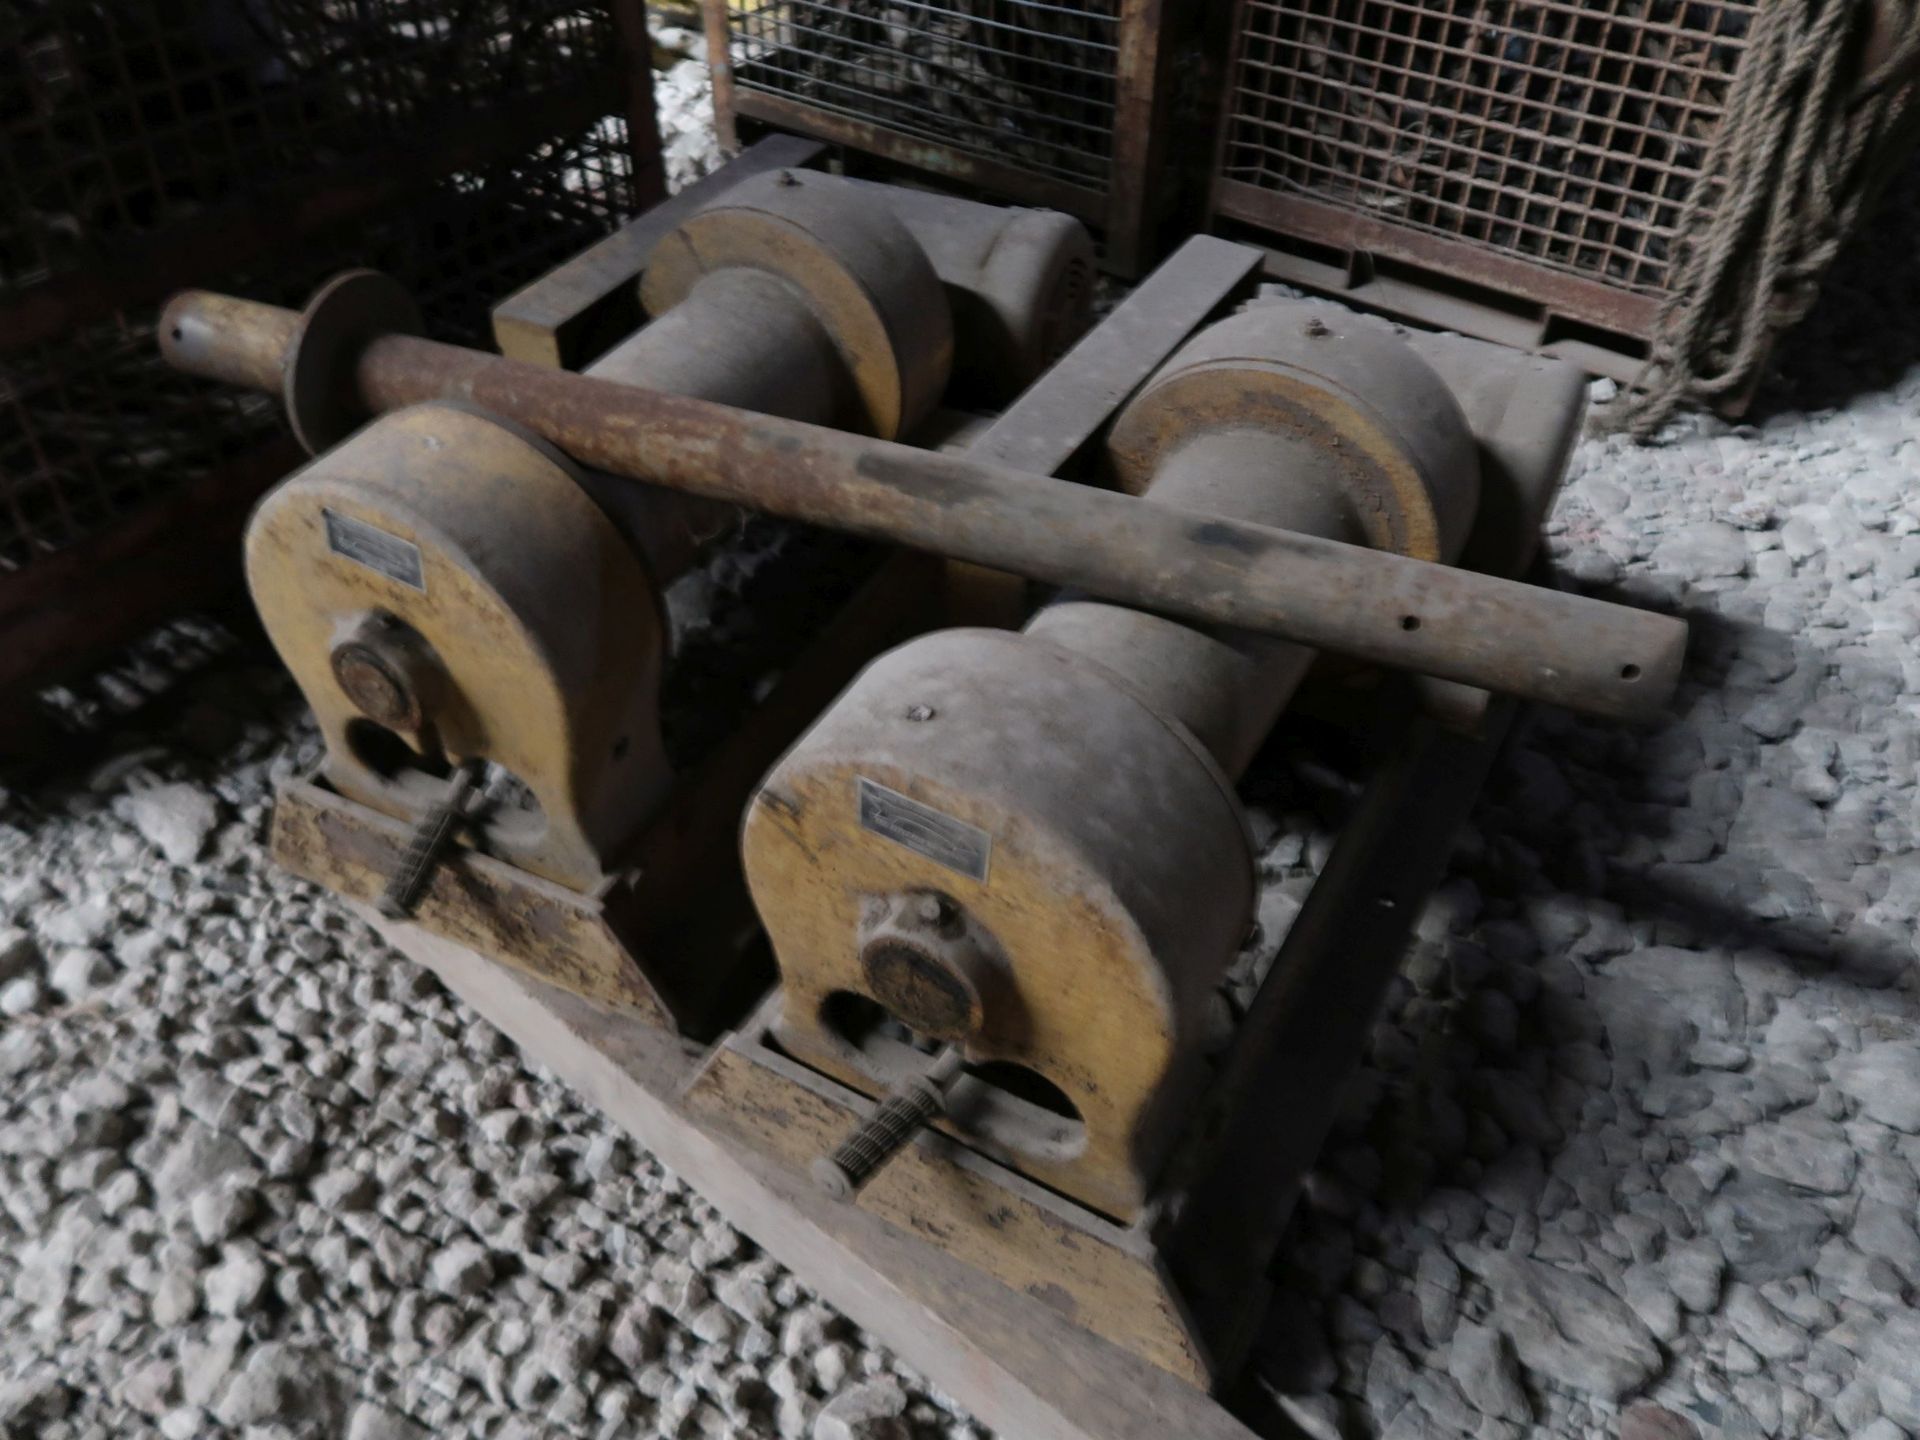 (LOT) LARGE QUANTITY OF STEEL ITEMS - PLATFORMS, BASKETS WITH RIGGING, SLINGS, SHACKLES, AND OTHER - - Image 4 of 10